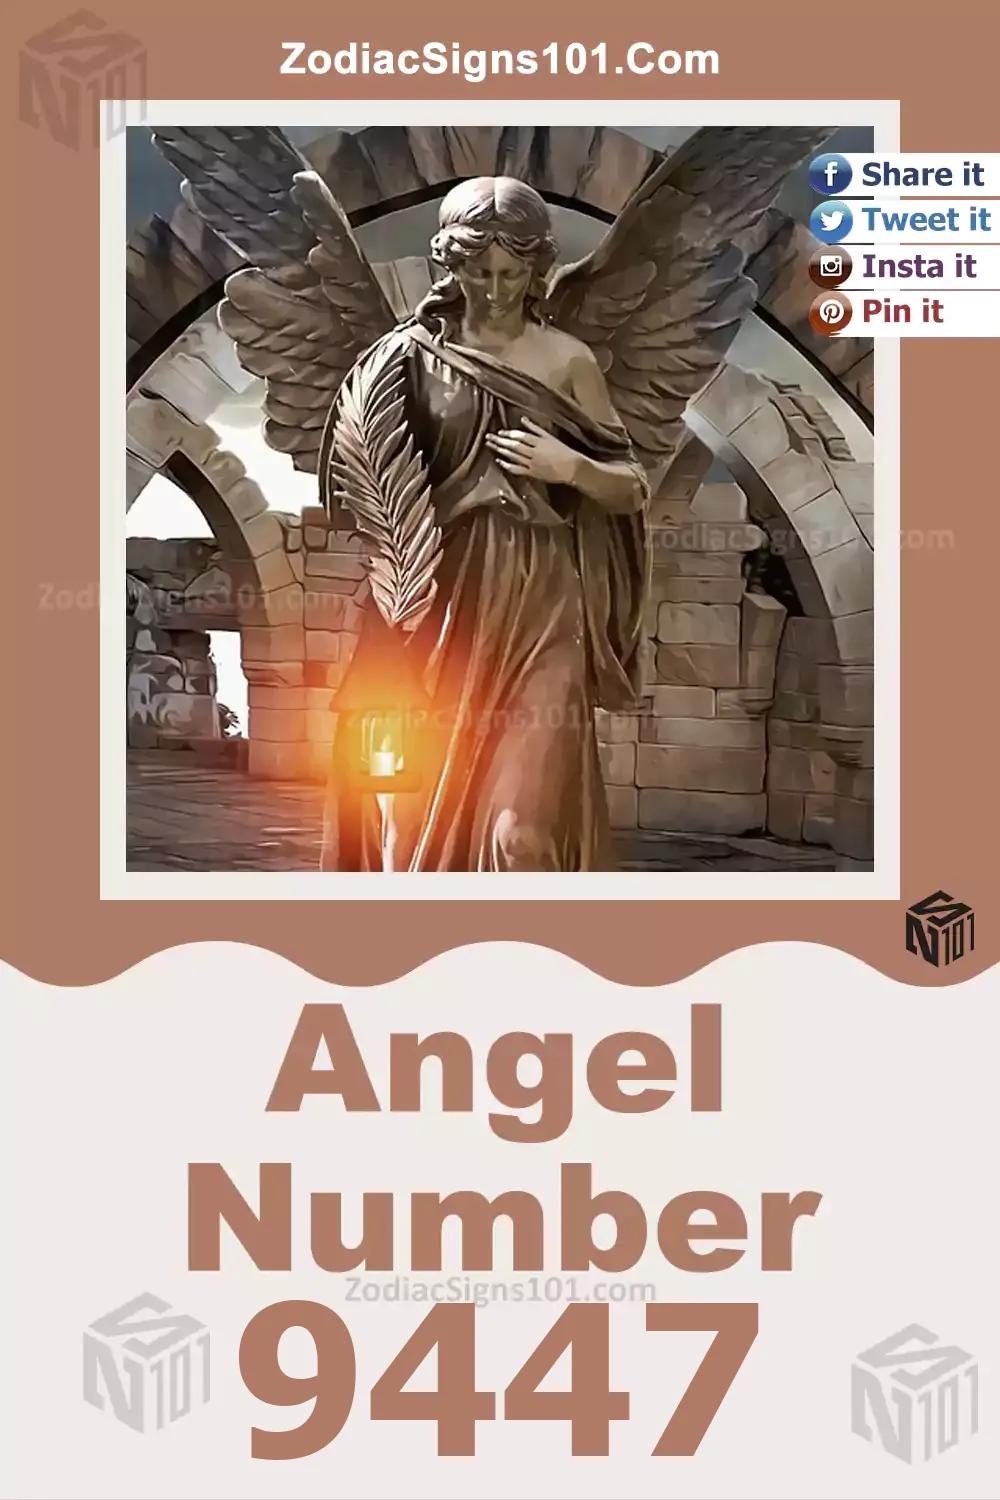 9447 Angel Number Meaning